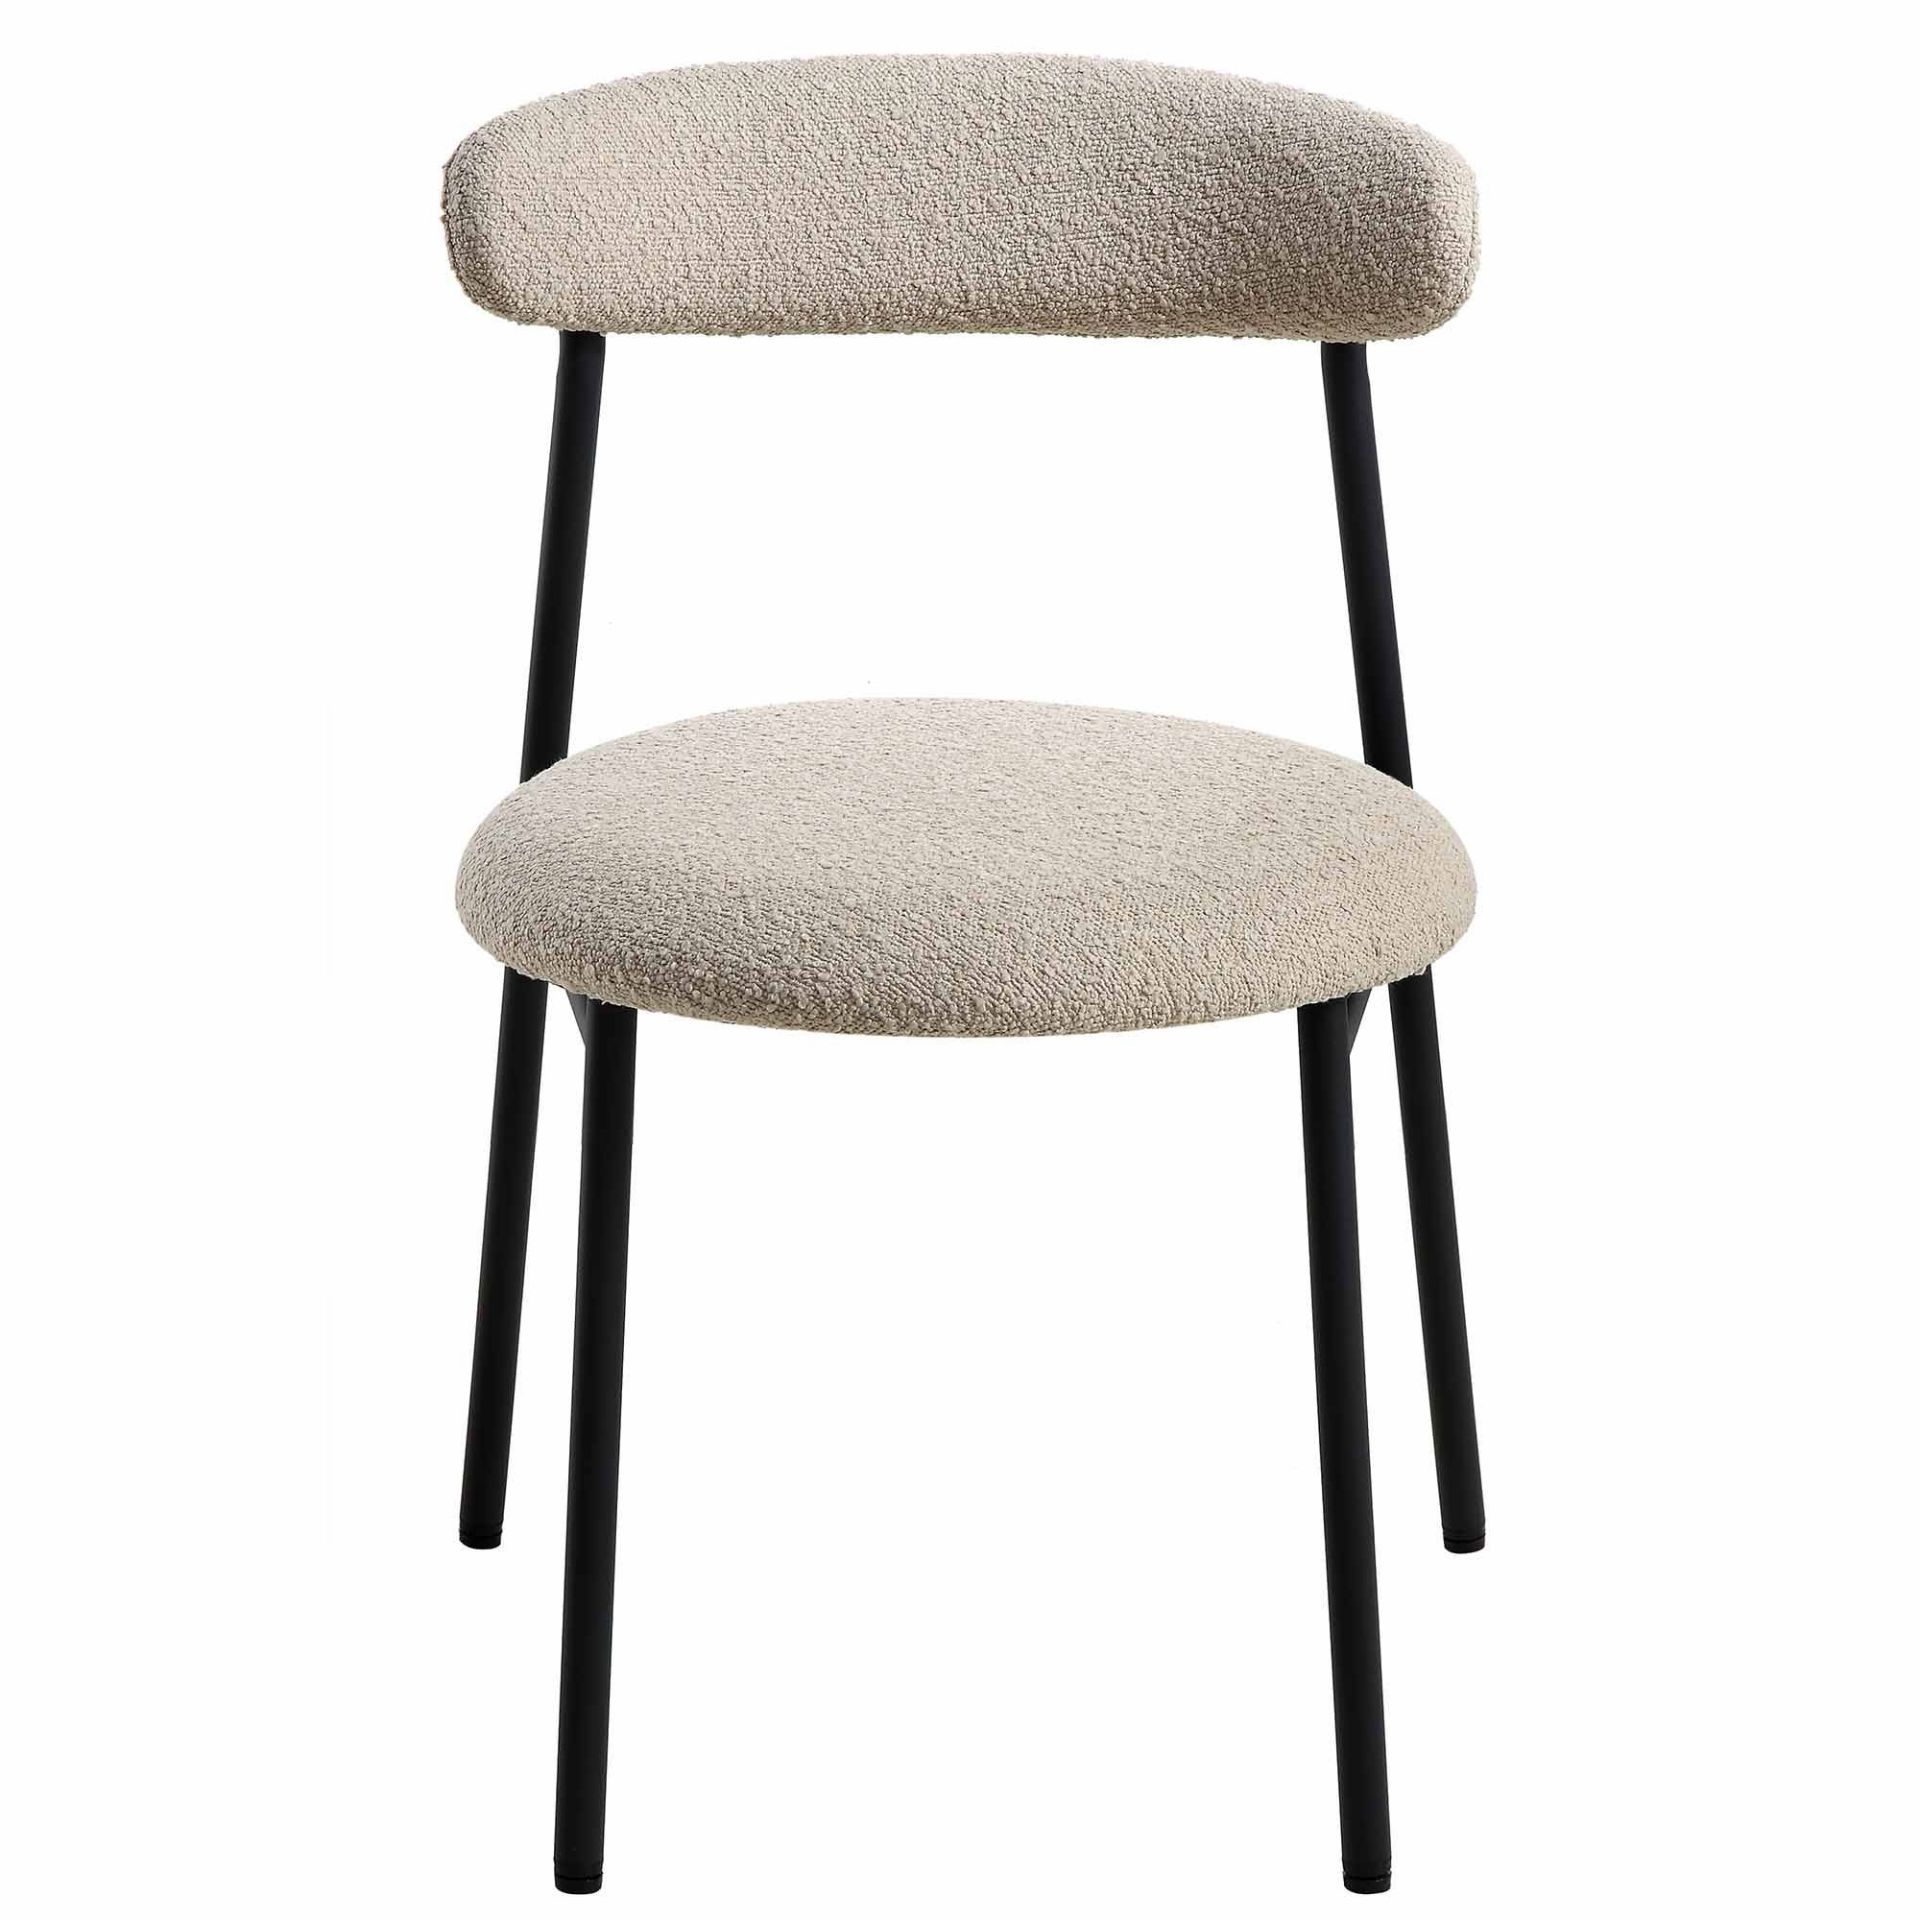 Donna Set of 2 Taupe Boucle Dining Chairs. - ER30. RRP £199.99. With slightly curved back and - Image 2 of 2